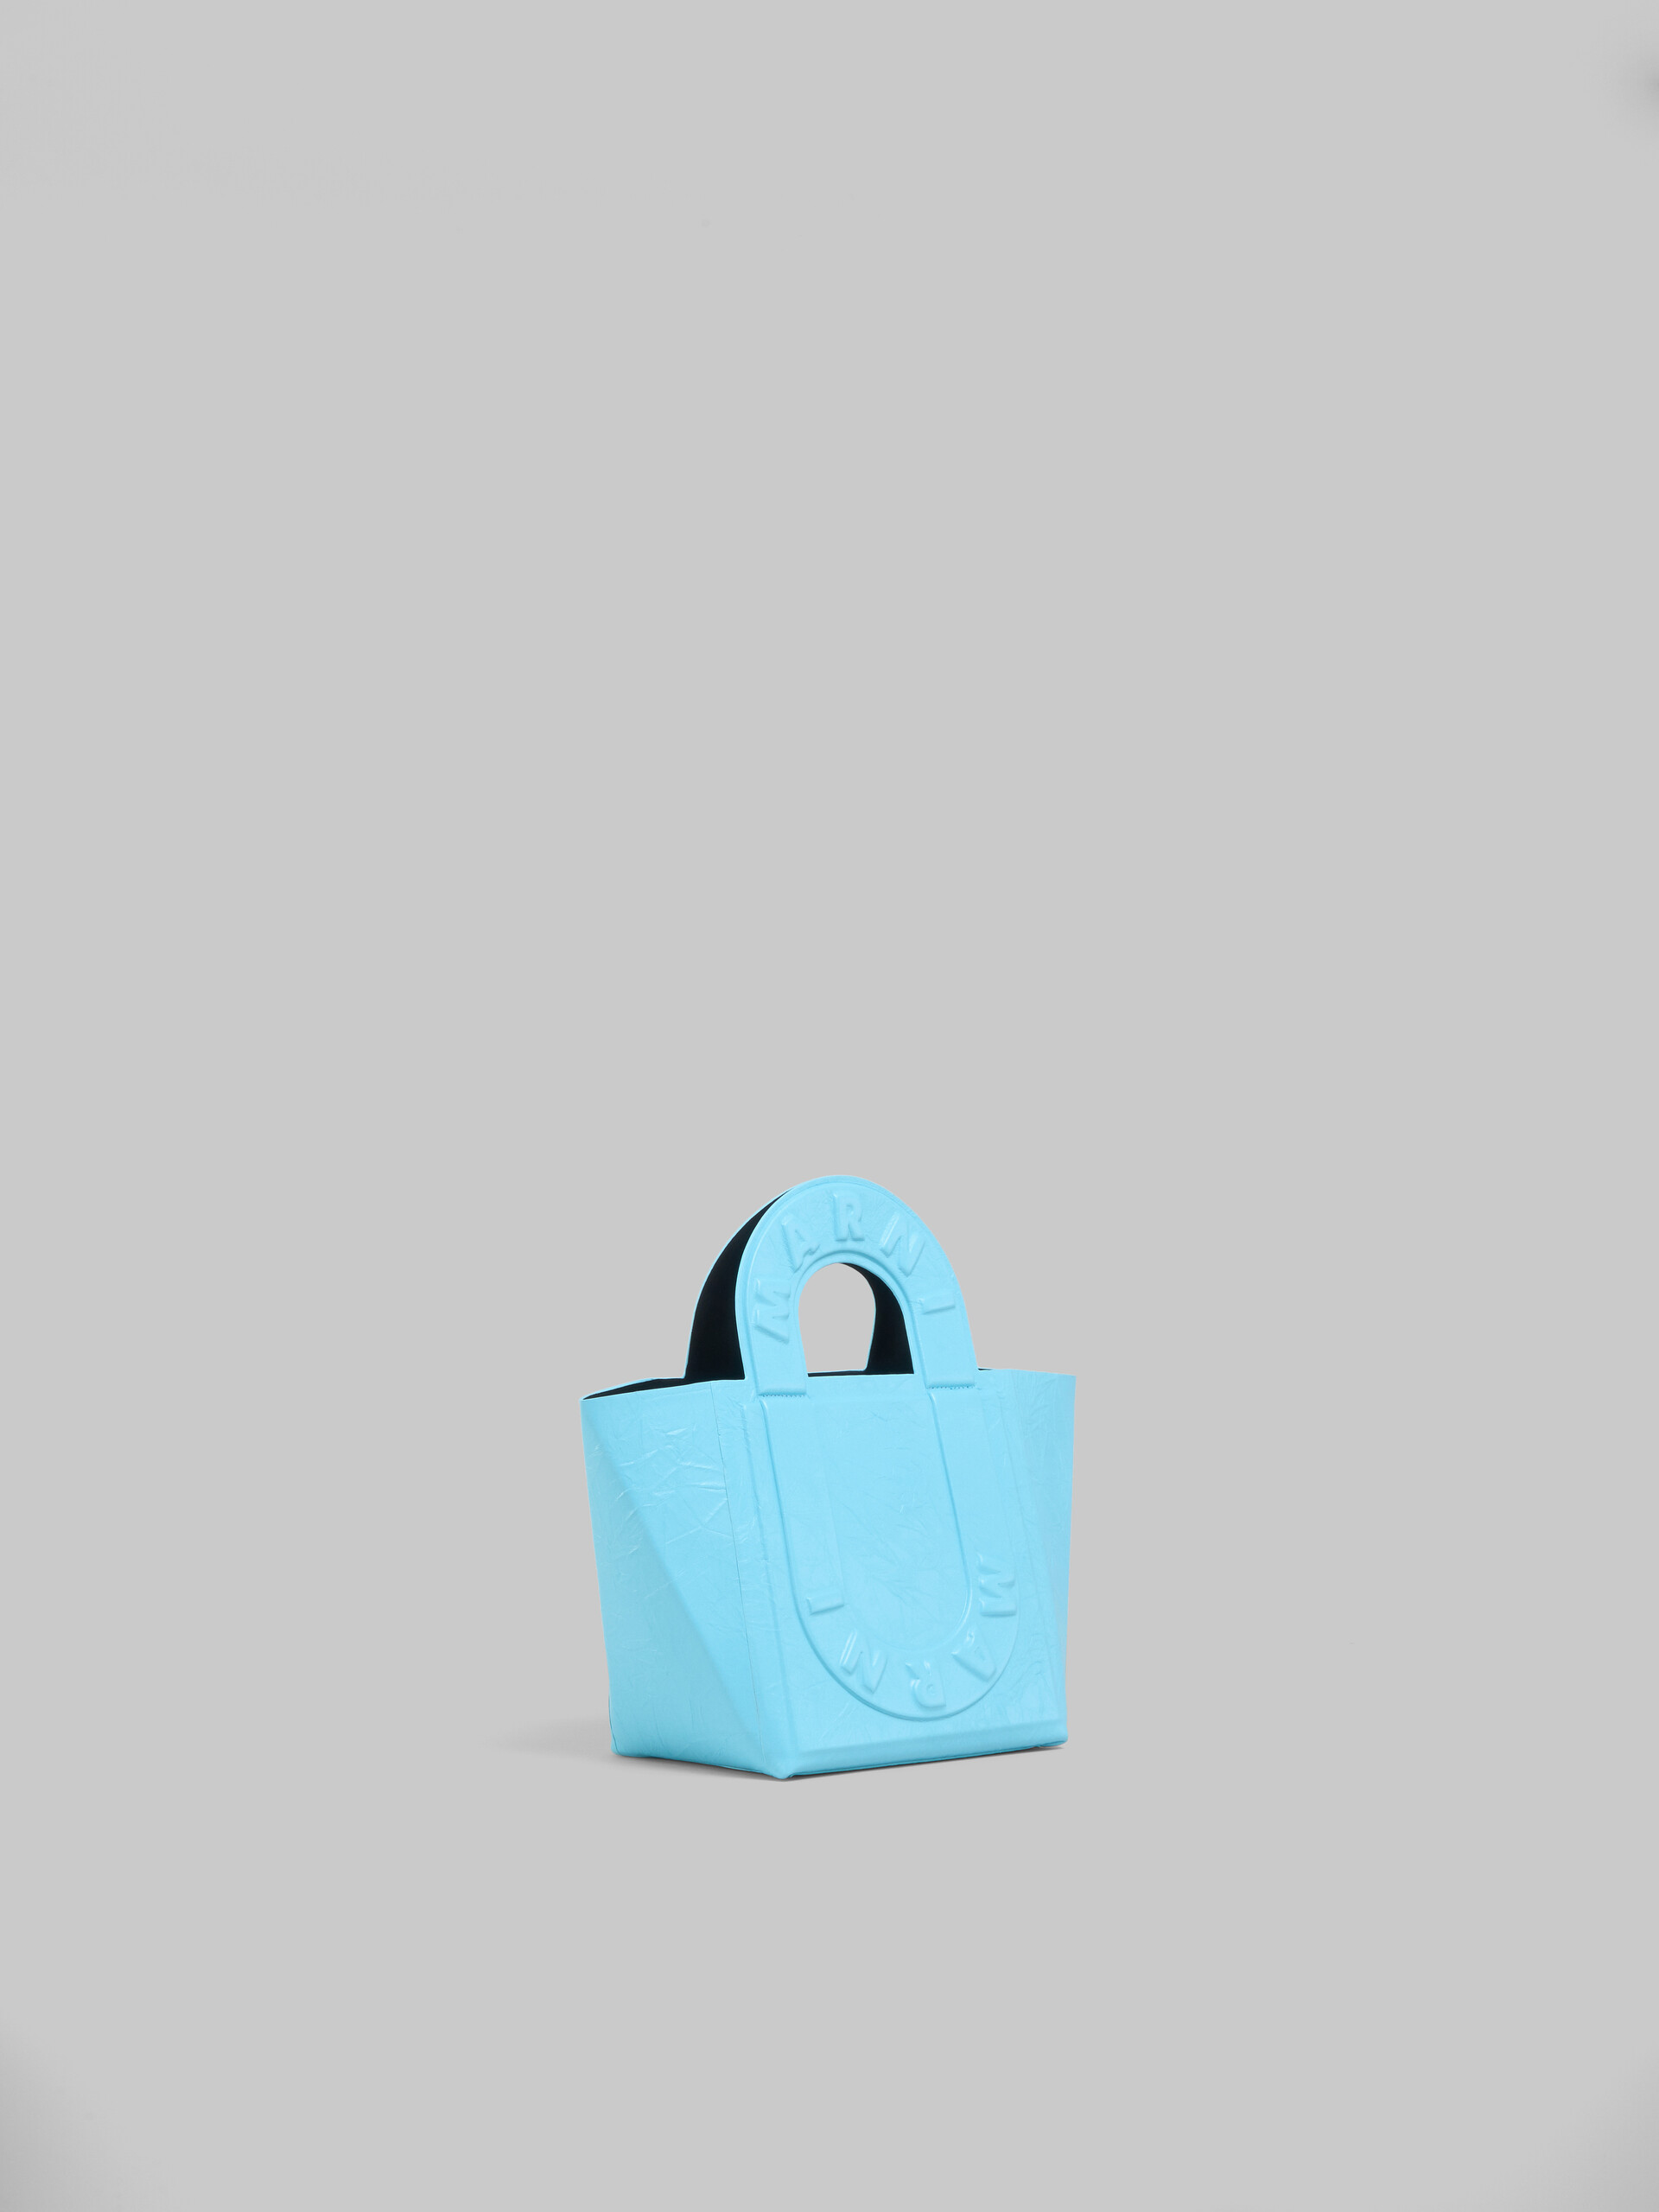 Turquoise leather Sweedy small tote bag - Shopping Bags - Image 5